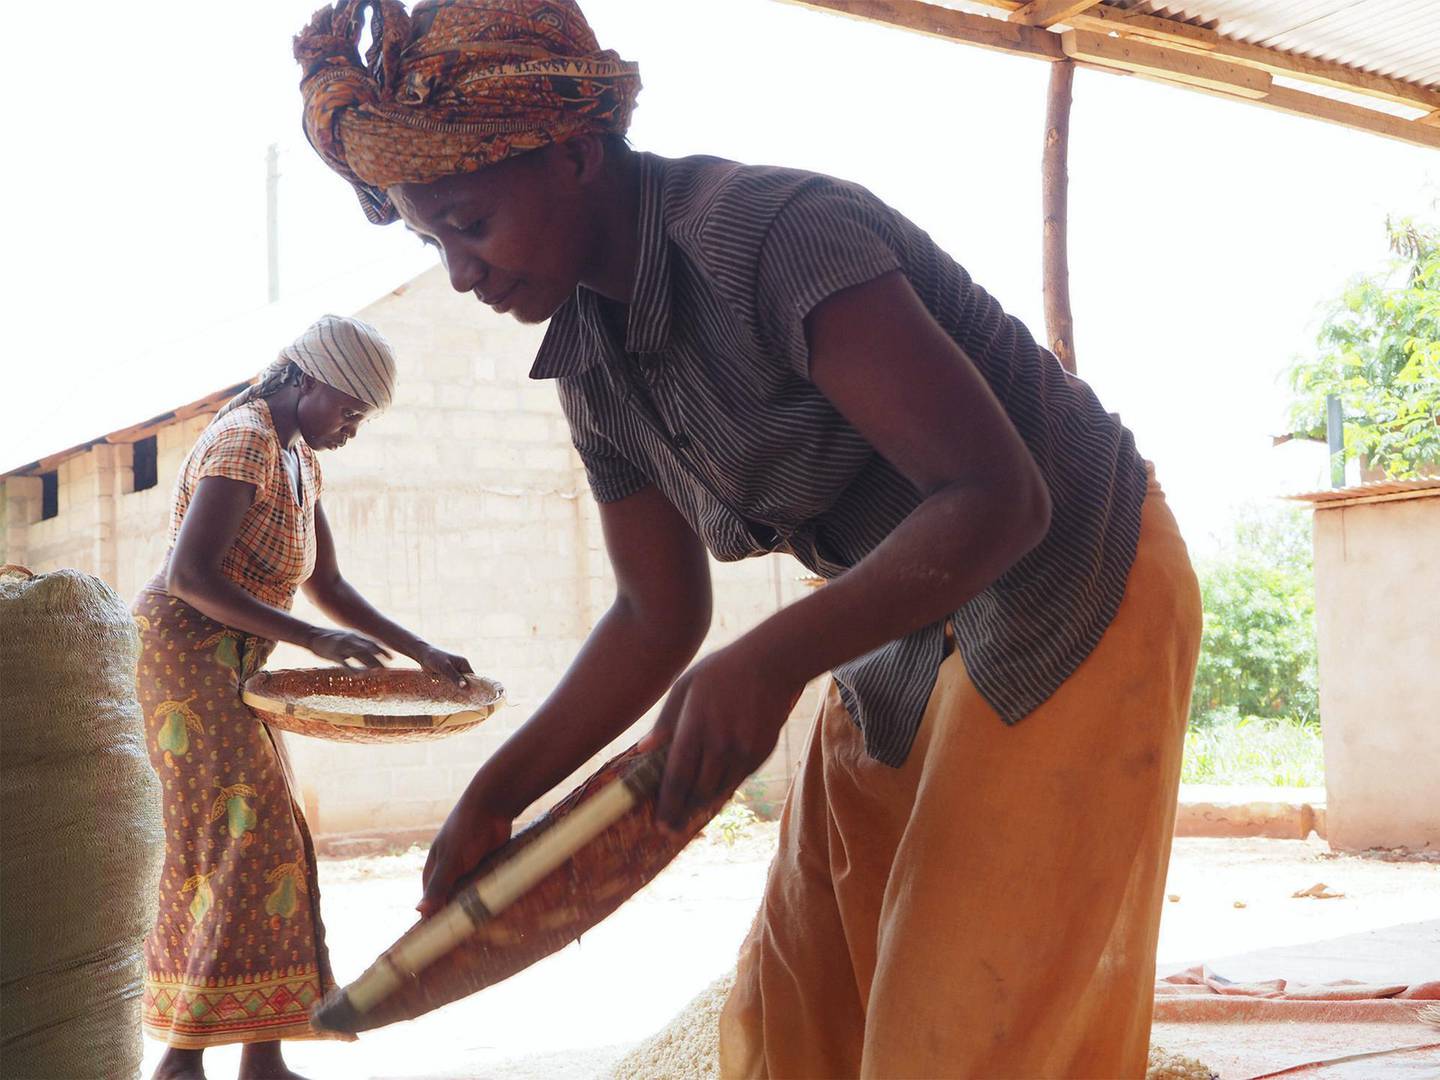 A woman collects flour that has been fortified with nutrients using a machine provided by Sanku, a non profit organisation that works to combat malnutrition East African countries. Courtesy Zayed Sustainability Prize